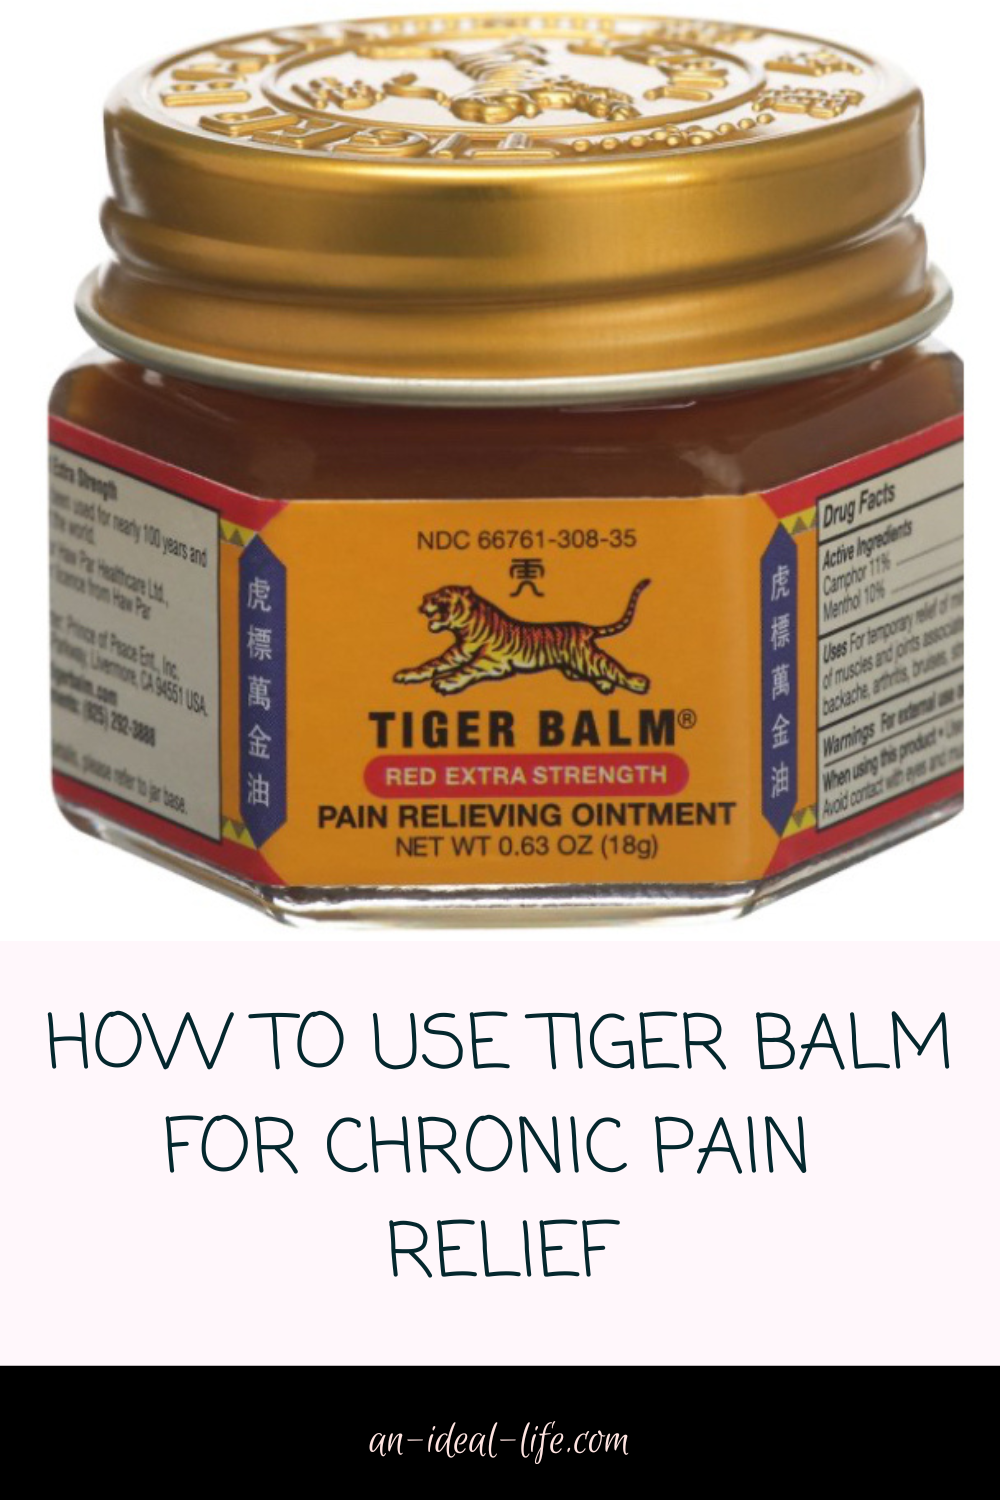 How to Use Tiger Balm for Chronic Pain Relief